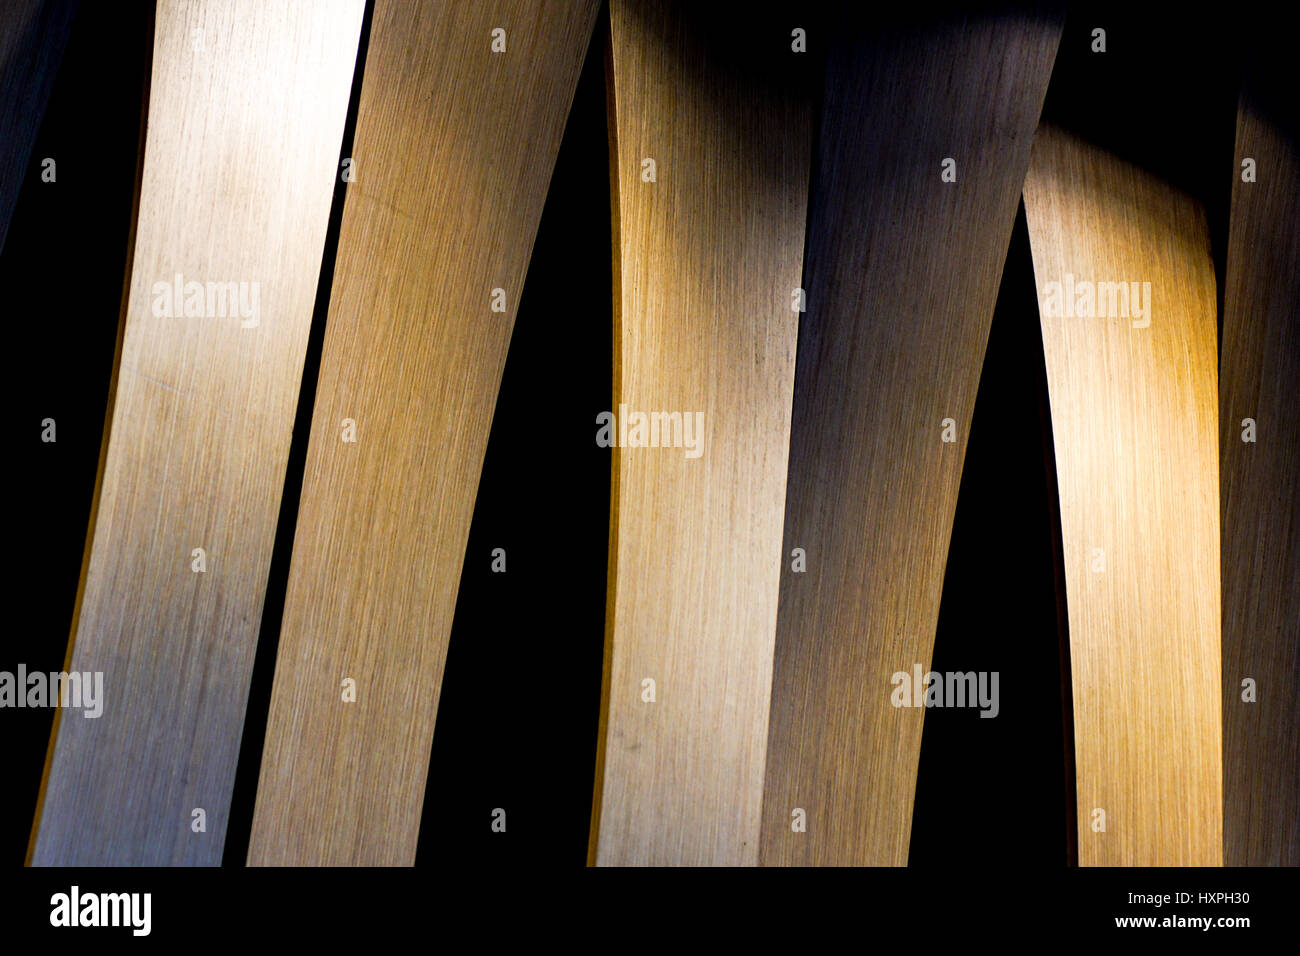 Grunge interior photo of wood wall with lateral lighting from led light . Abstract architecture image in classic style with contrast Stock Photo